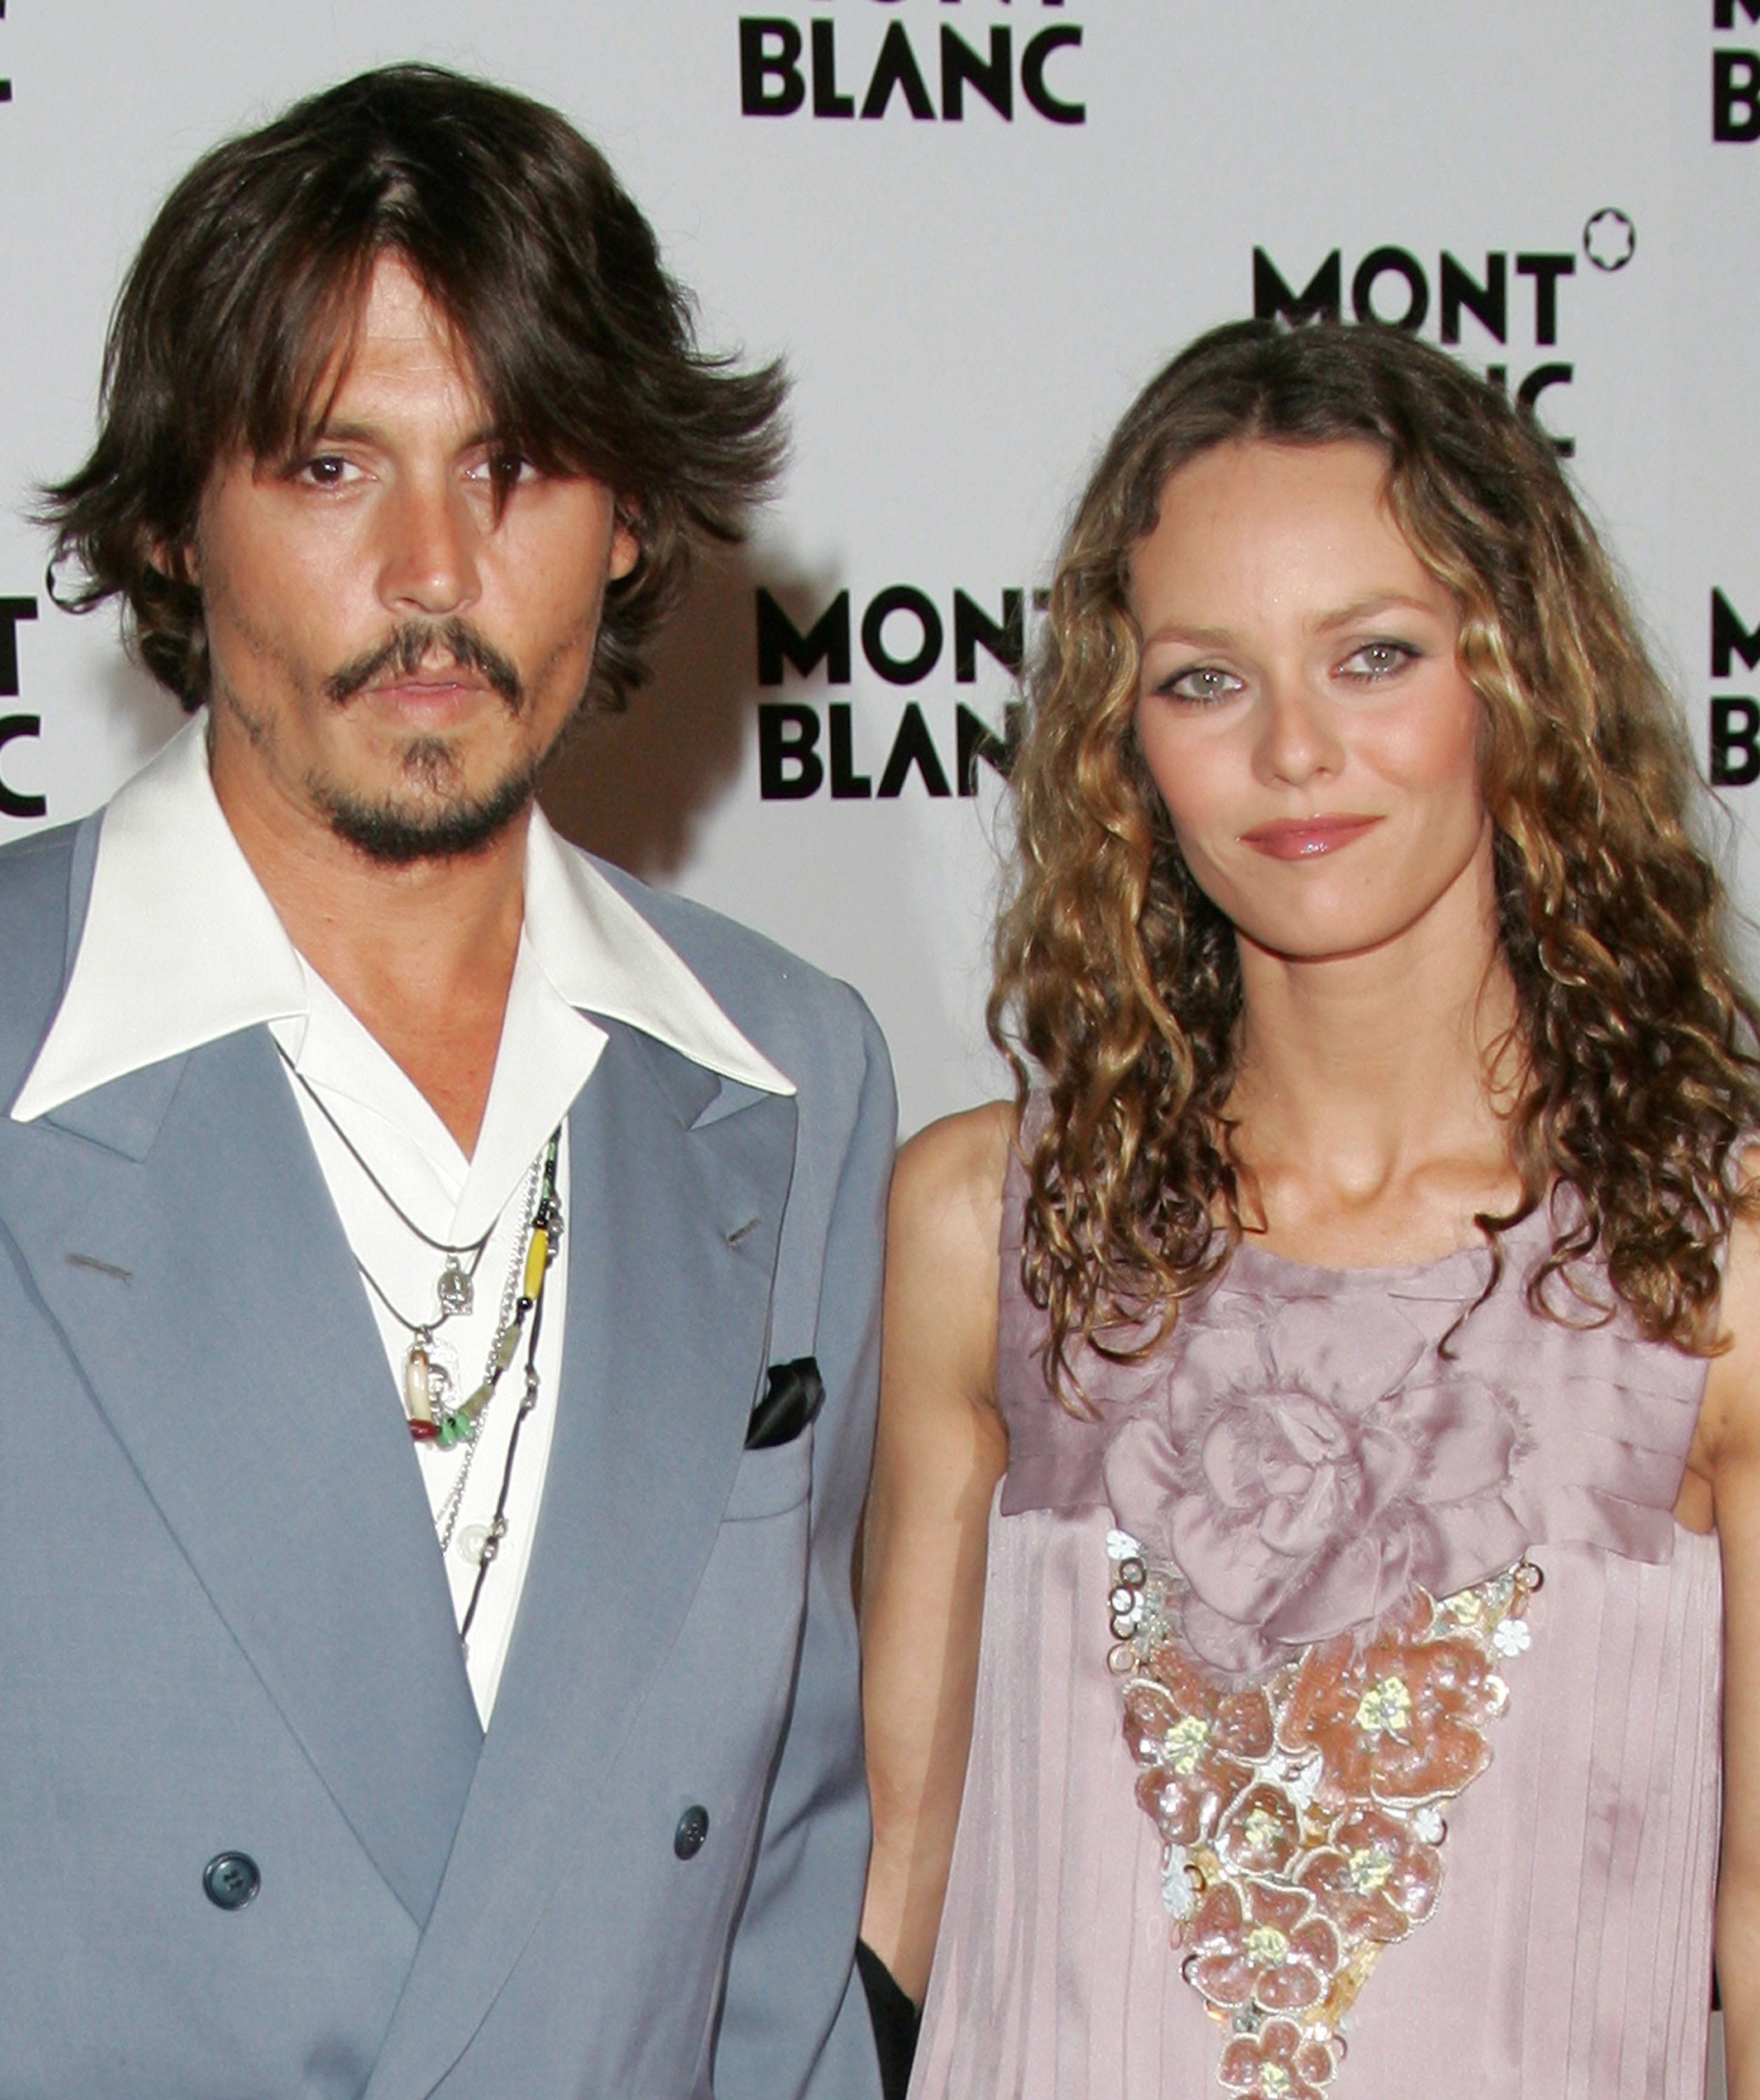 Johnny Depp and Vanessa Paradis at the "Mont Blanc" 100th Anniversary Party on April 5, 2006. | Source: Toni Anne Barson/WireImage/Getty Images